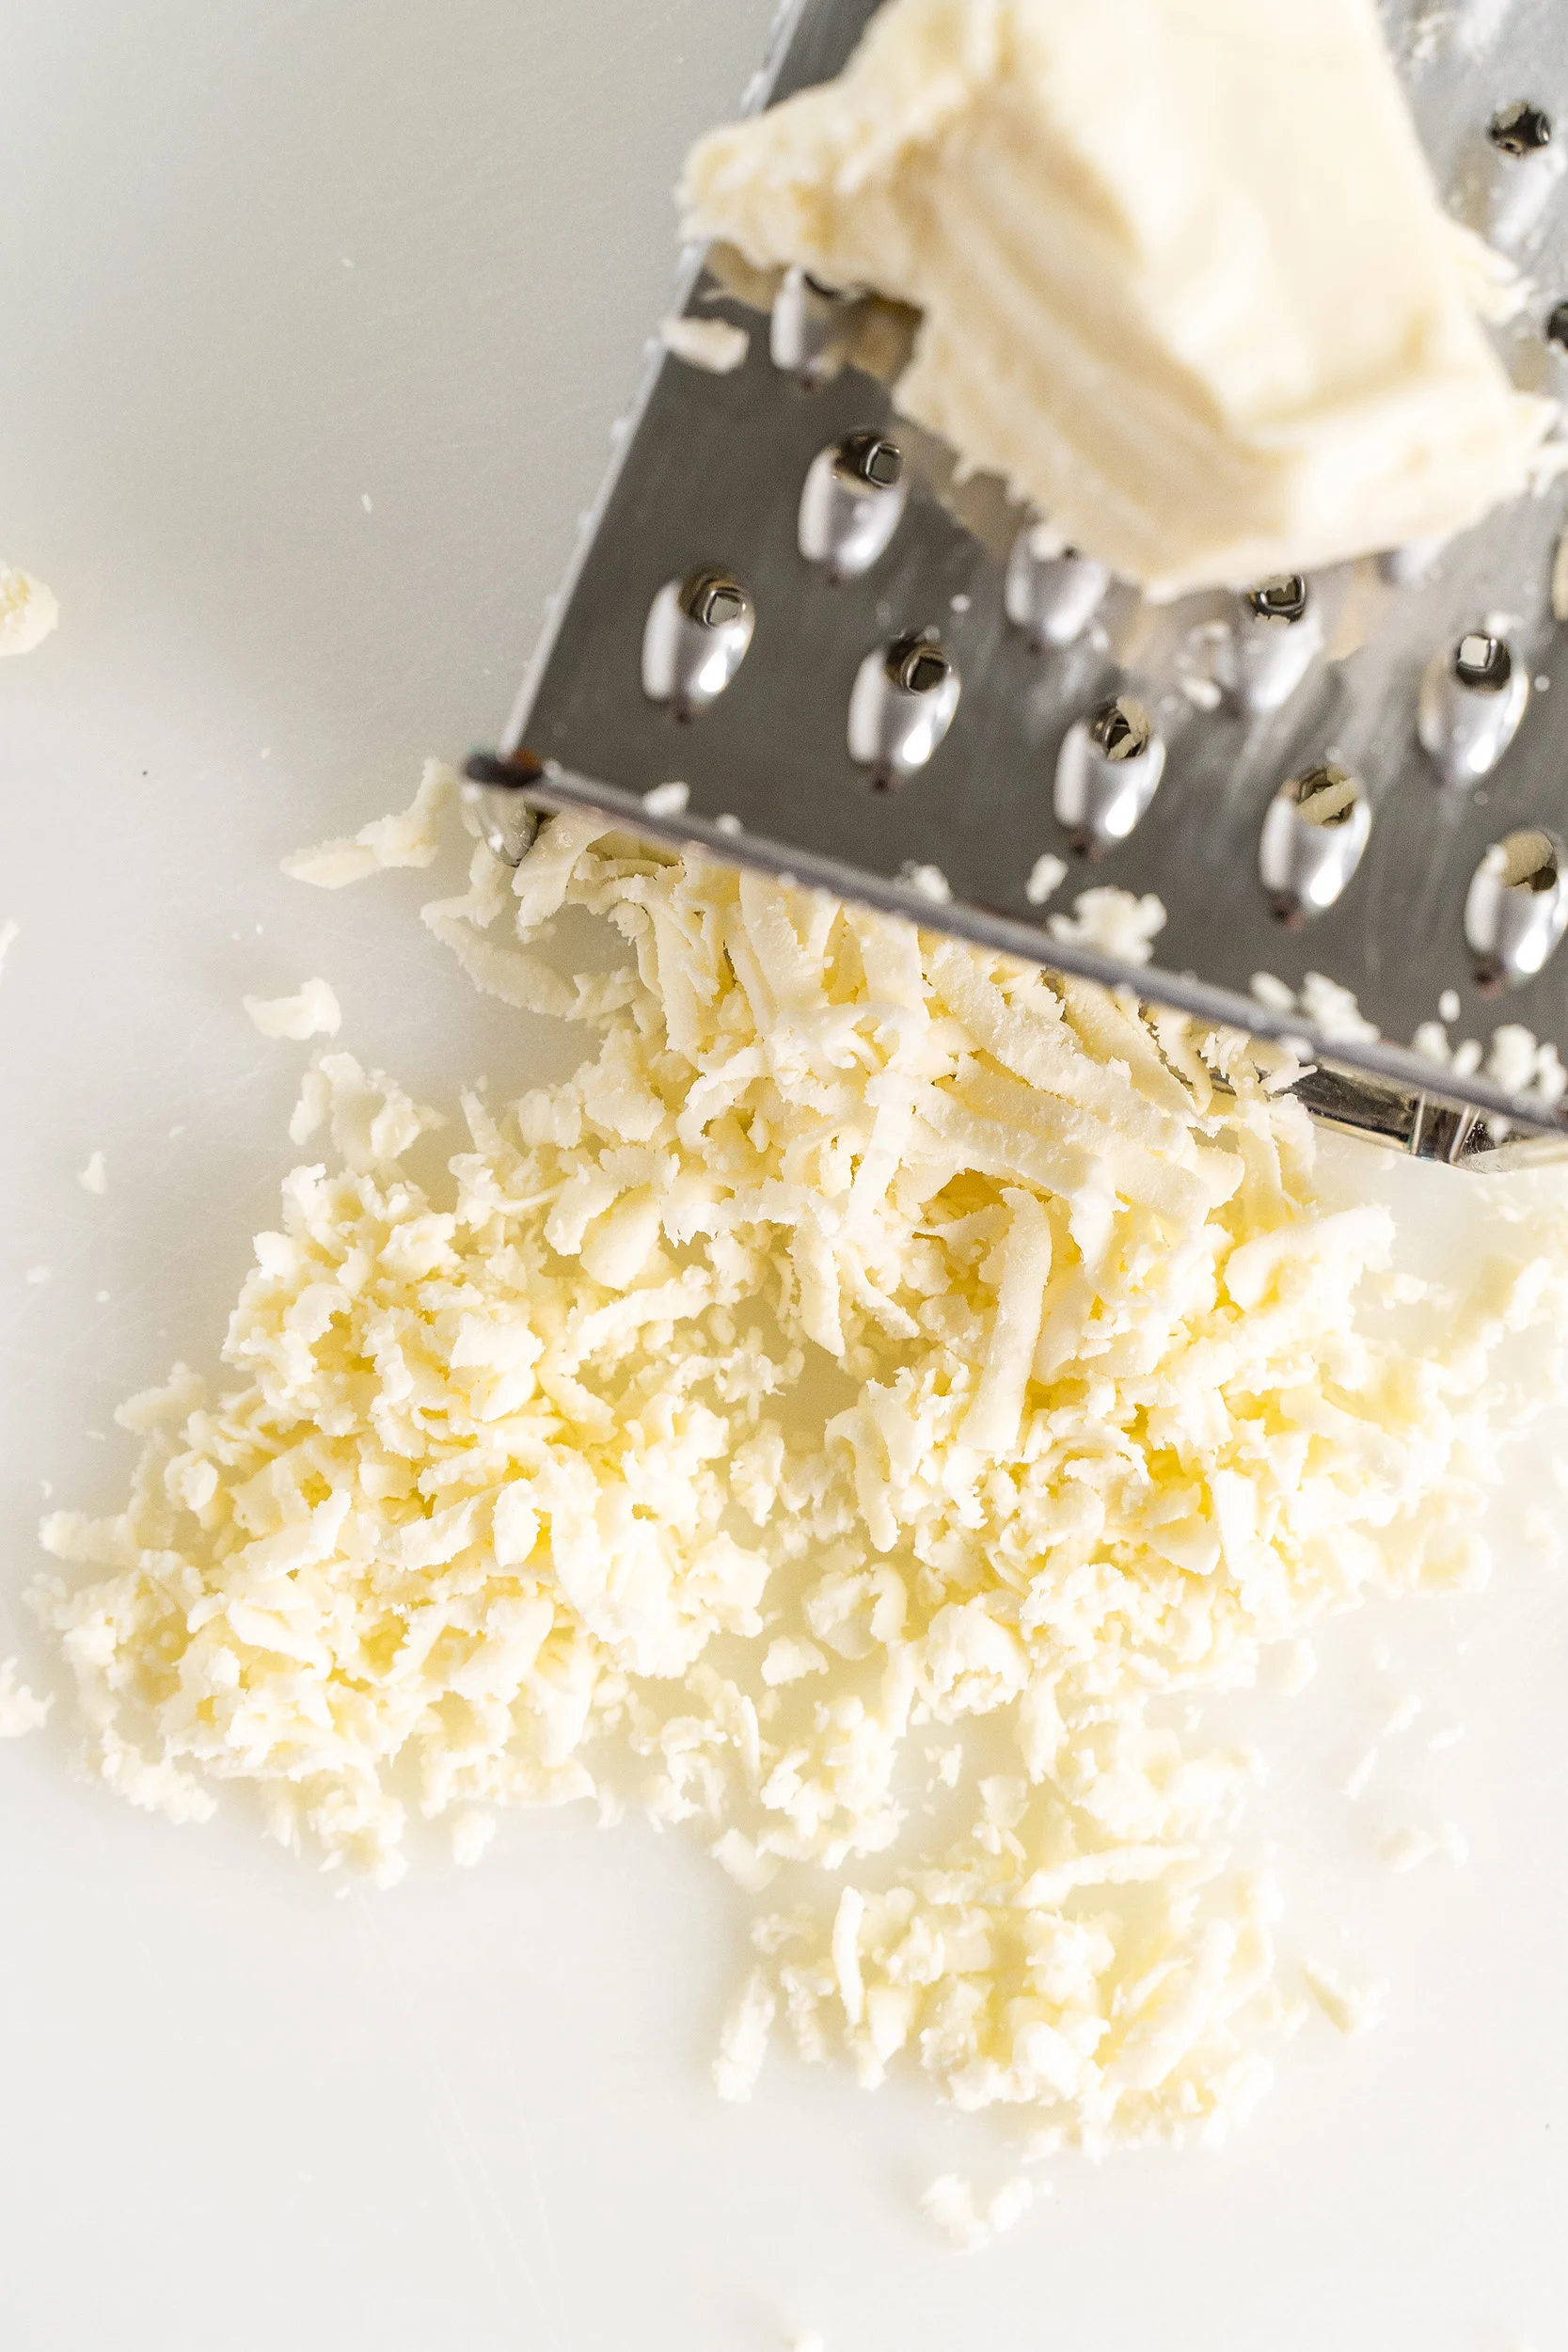 shredded mozzarella cheese and a box grater